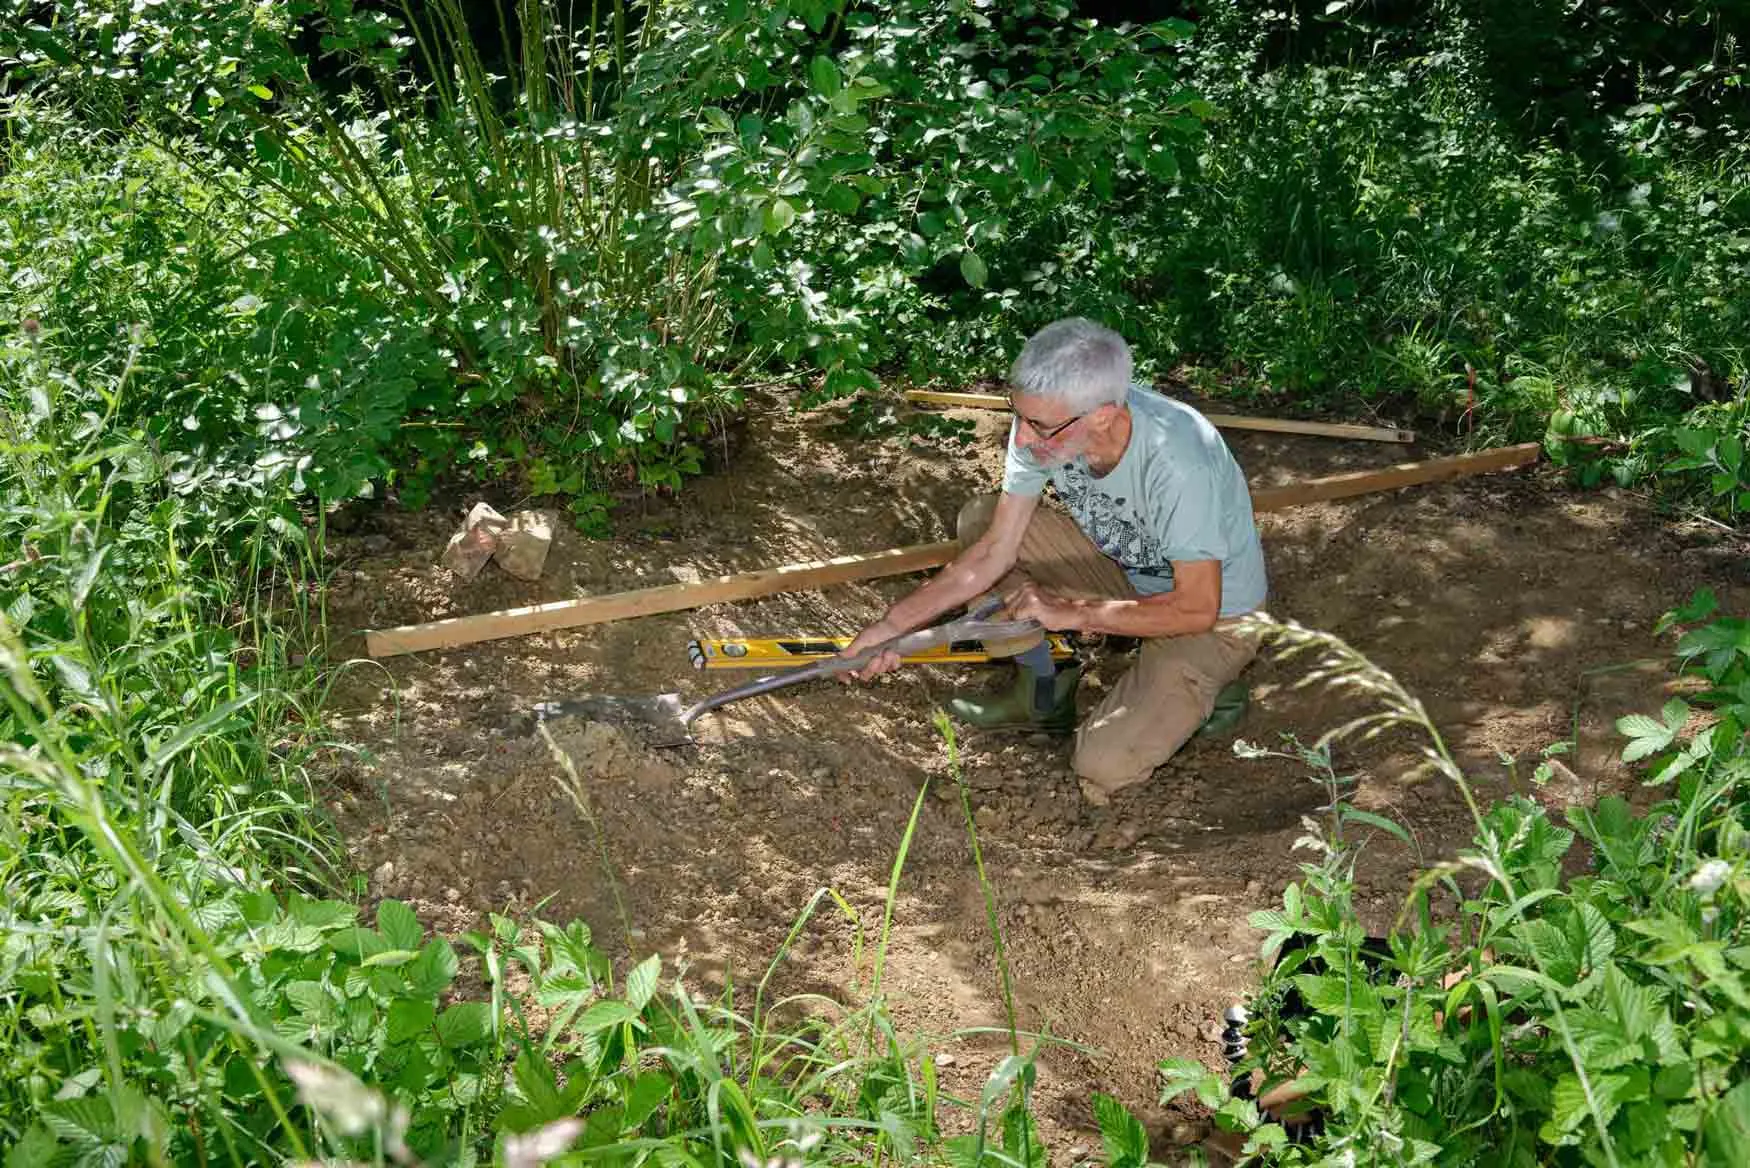 A man crouched down in amongst tall grass digging out a large pond.